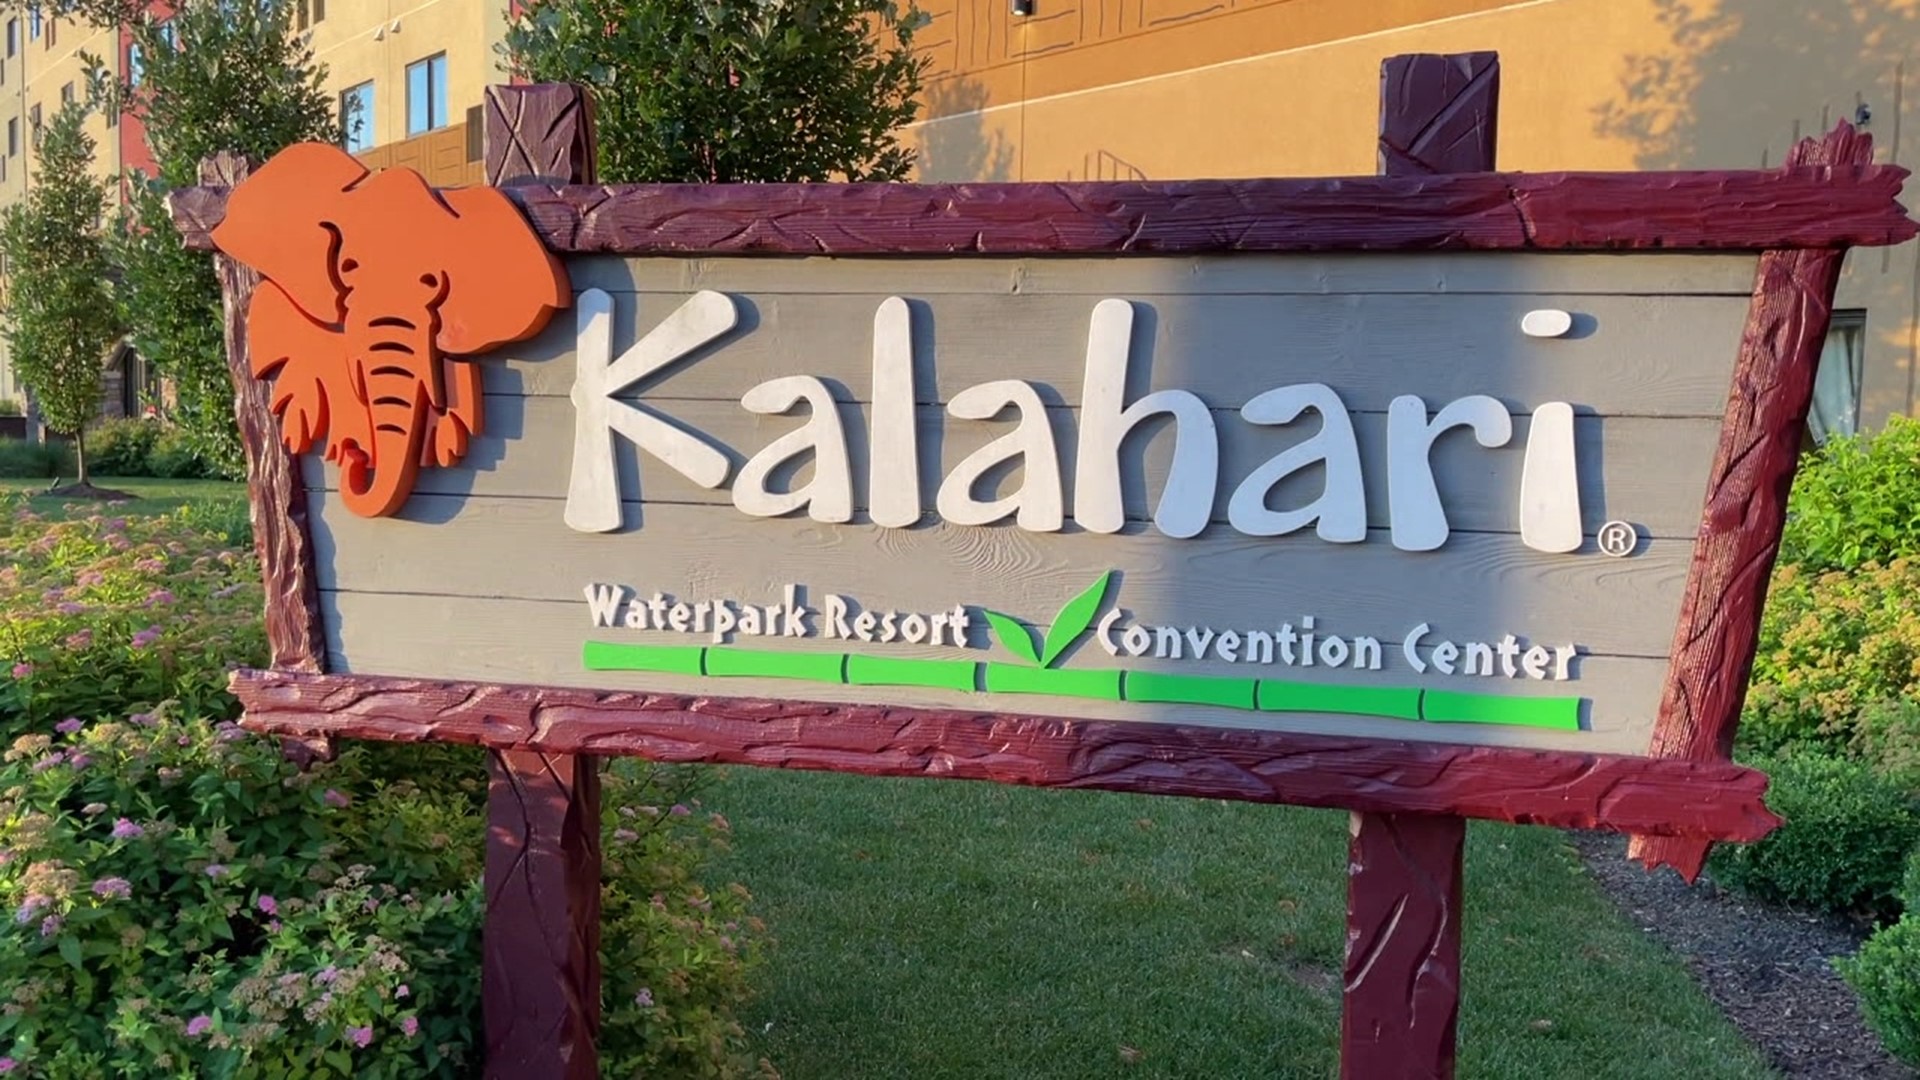 The founders of Kalahari have committed to matching up to $1 million in donations throughout the fundraising campaign.